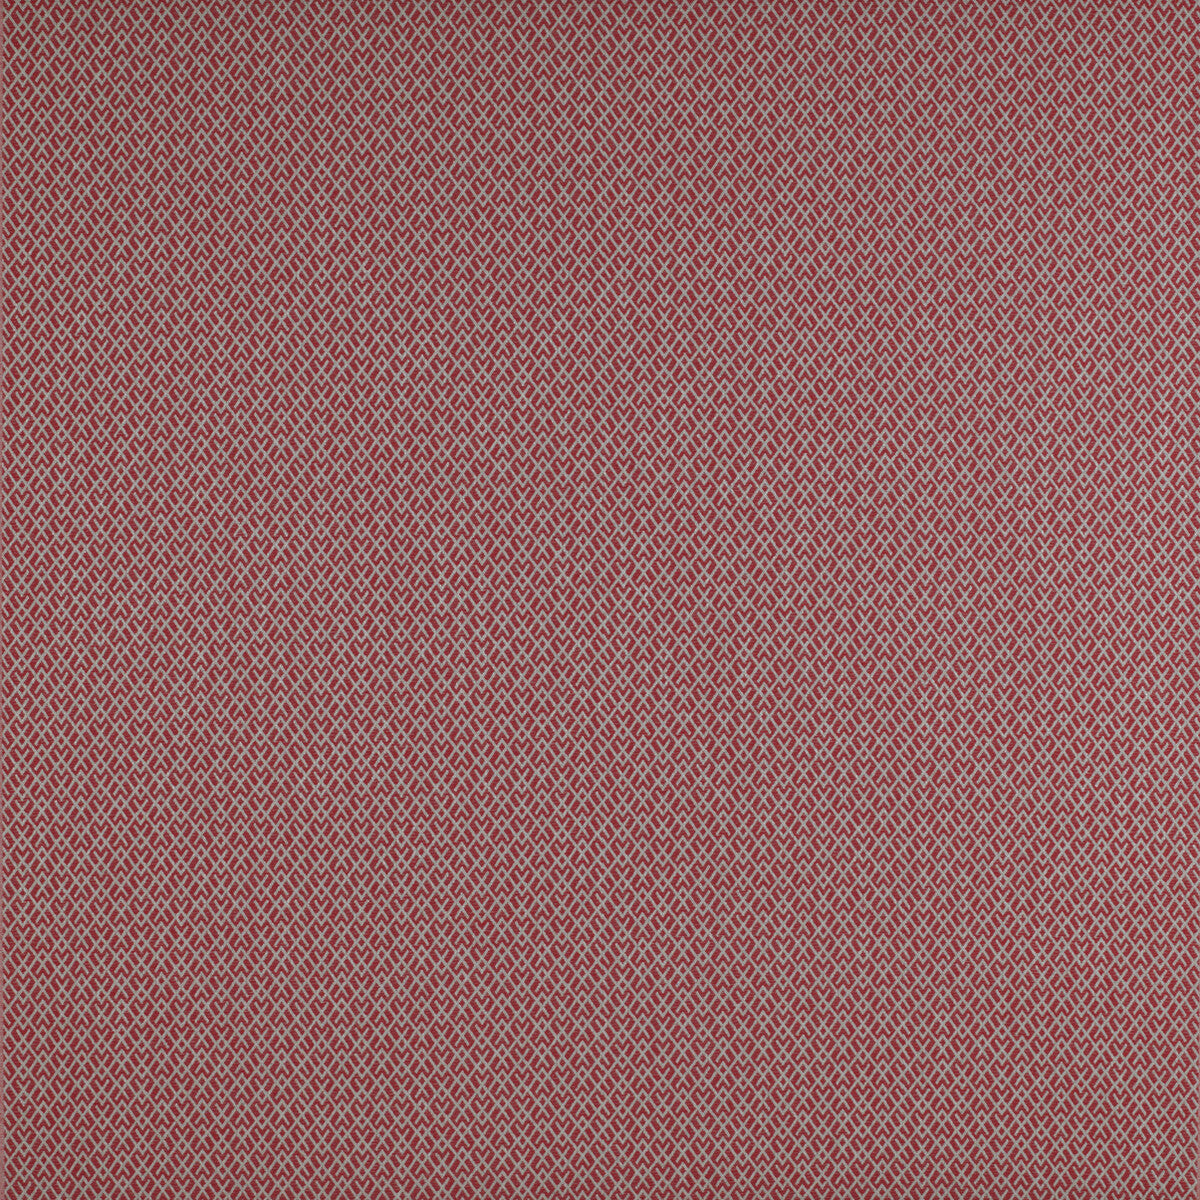 Chueca fabric in rojo color - pattern GDT5205.012.0 - by Gaston y Daniela in the Madrid collection